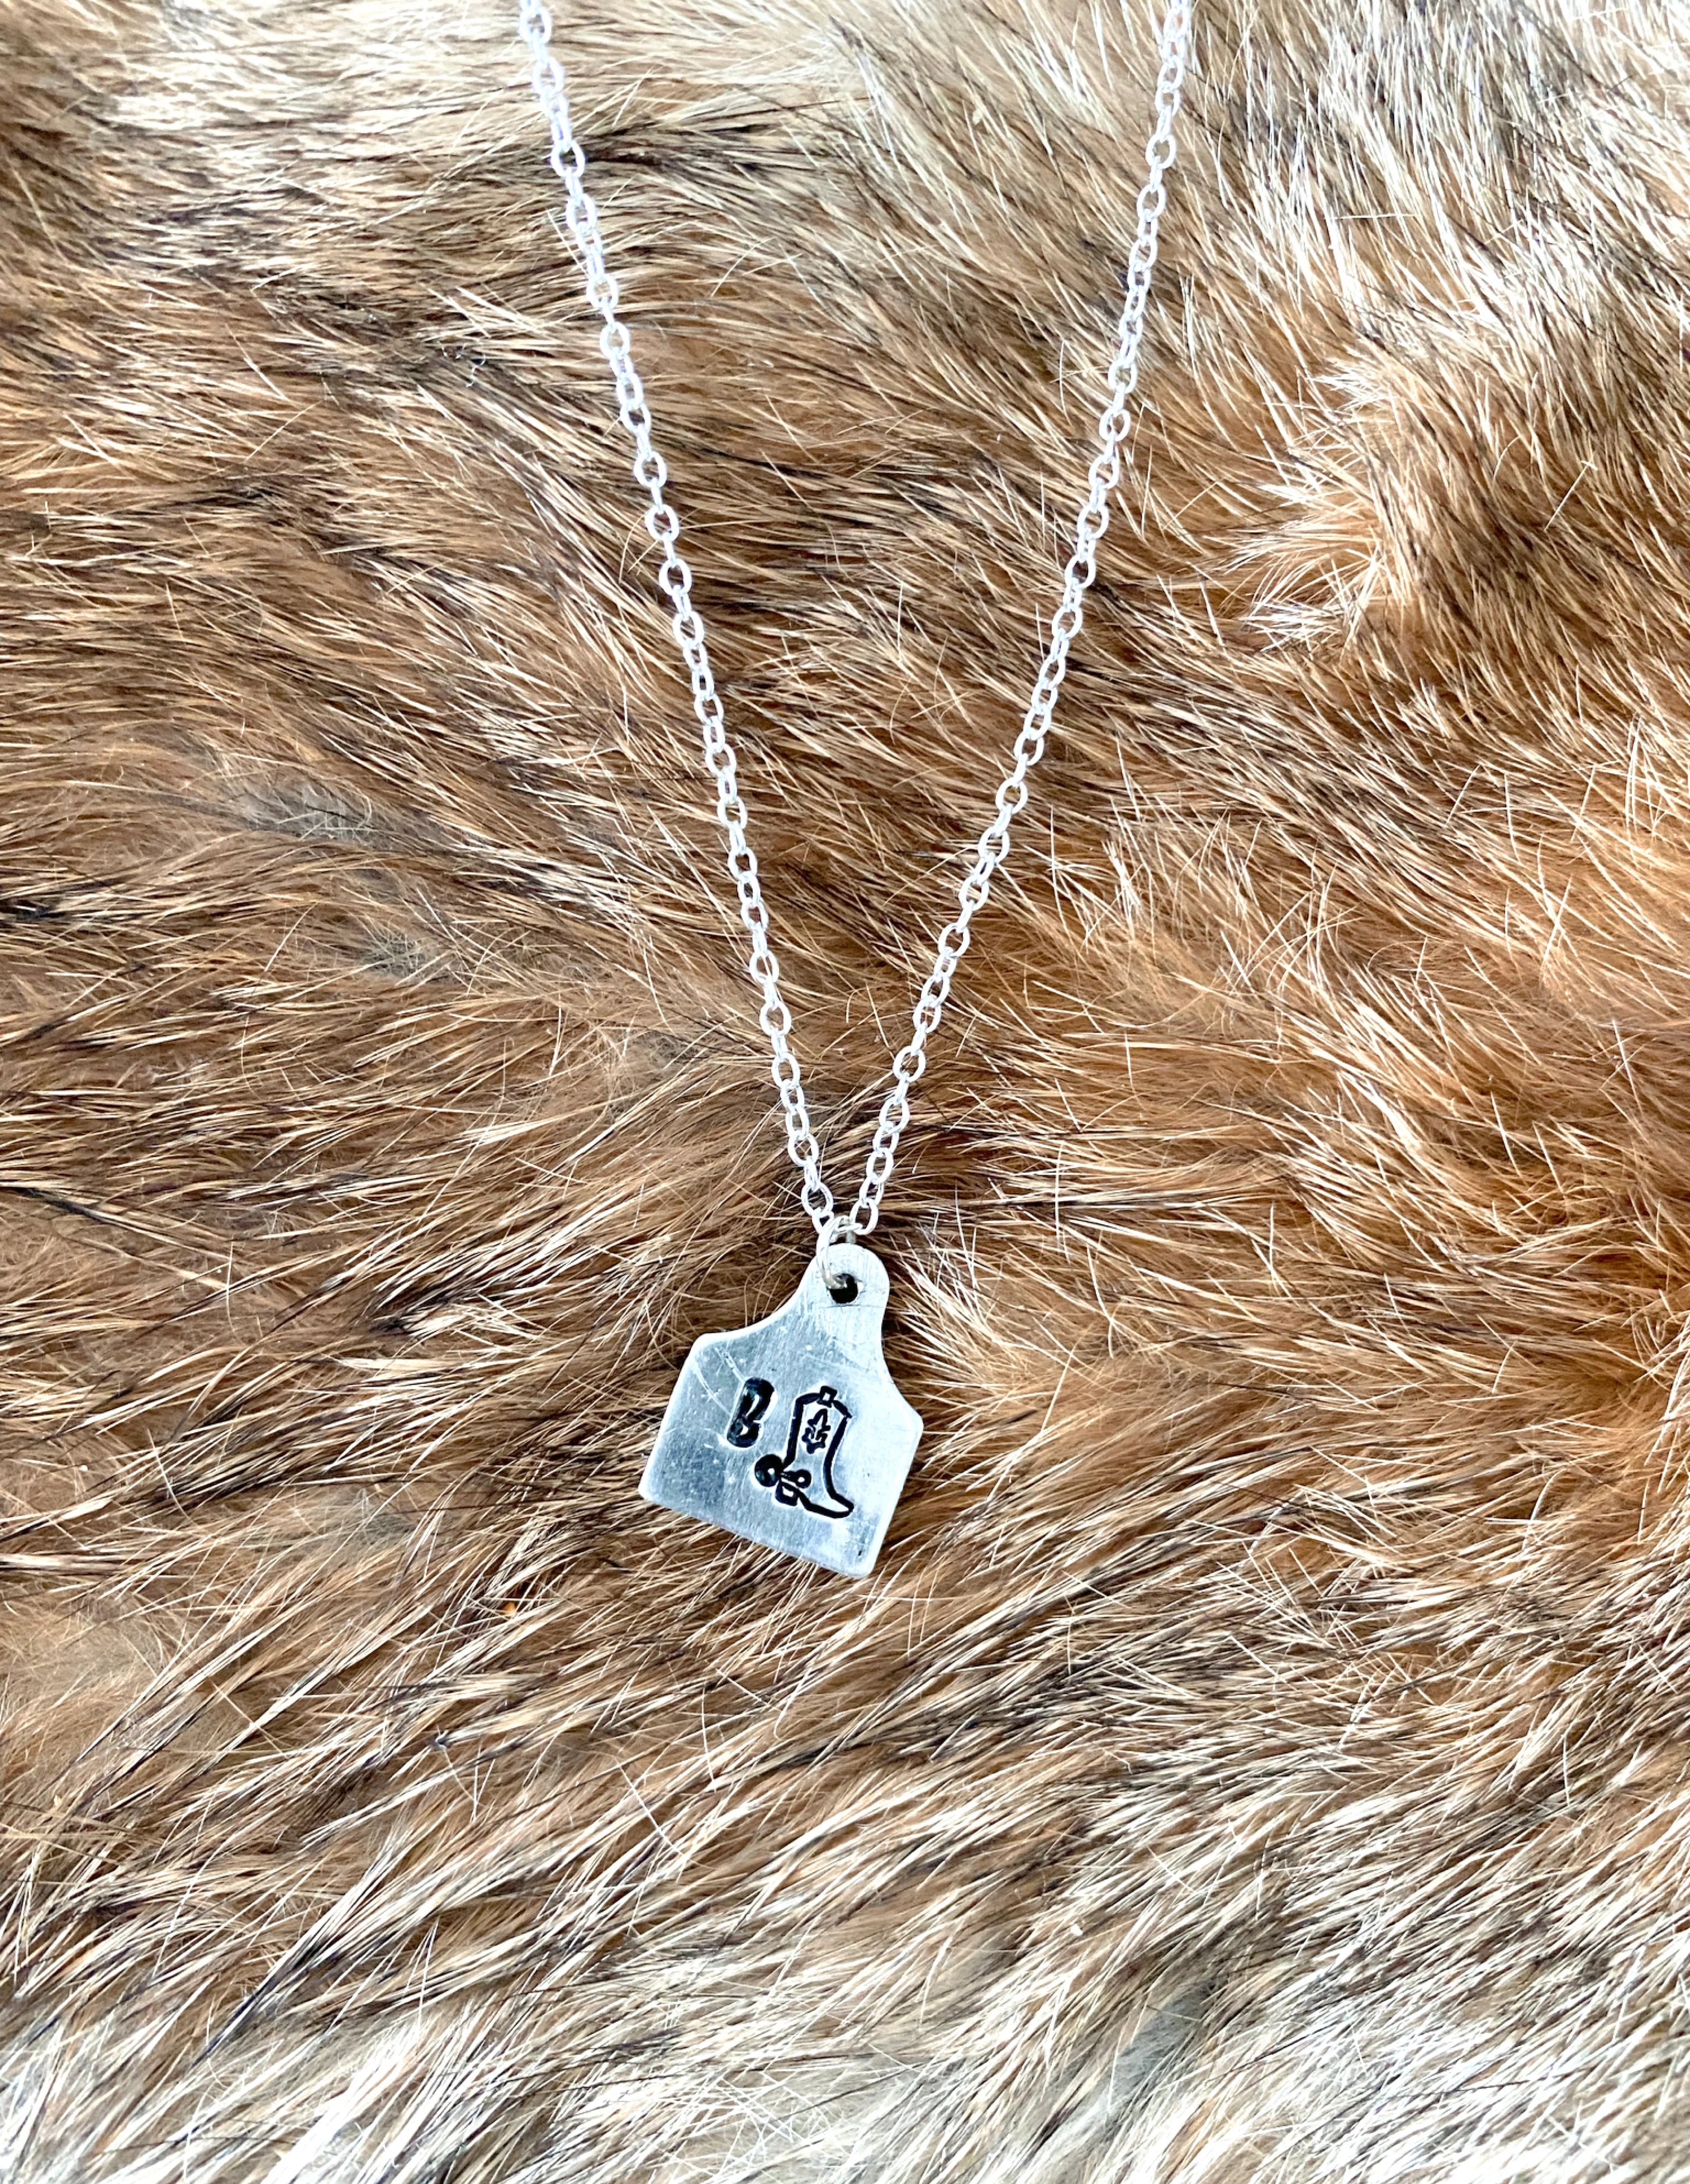 Personalised Mini Cattle Tag Necklace Mother's Day Gift - Etsy in 2023 |  Country girl gifts, Western necklaces, Mother's day gifts